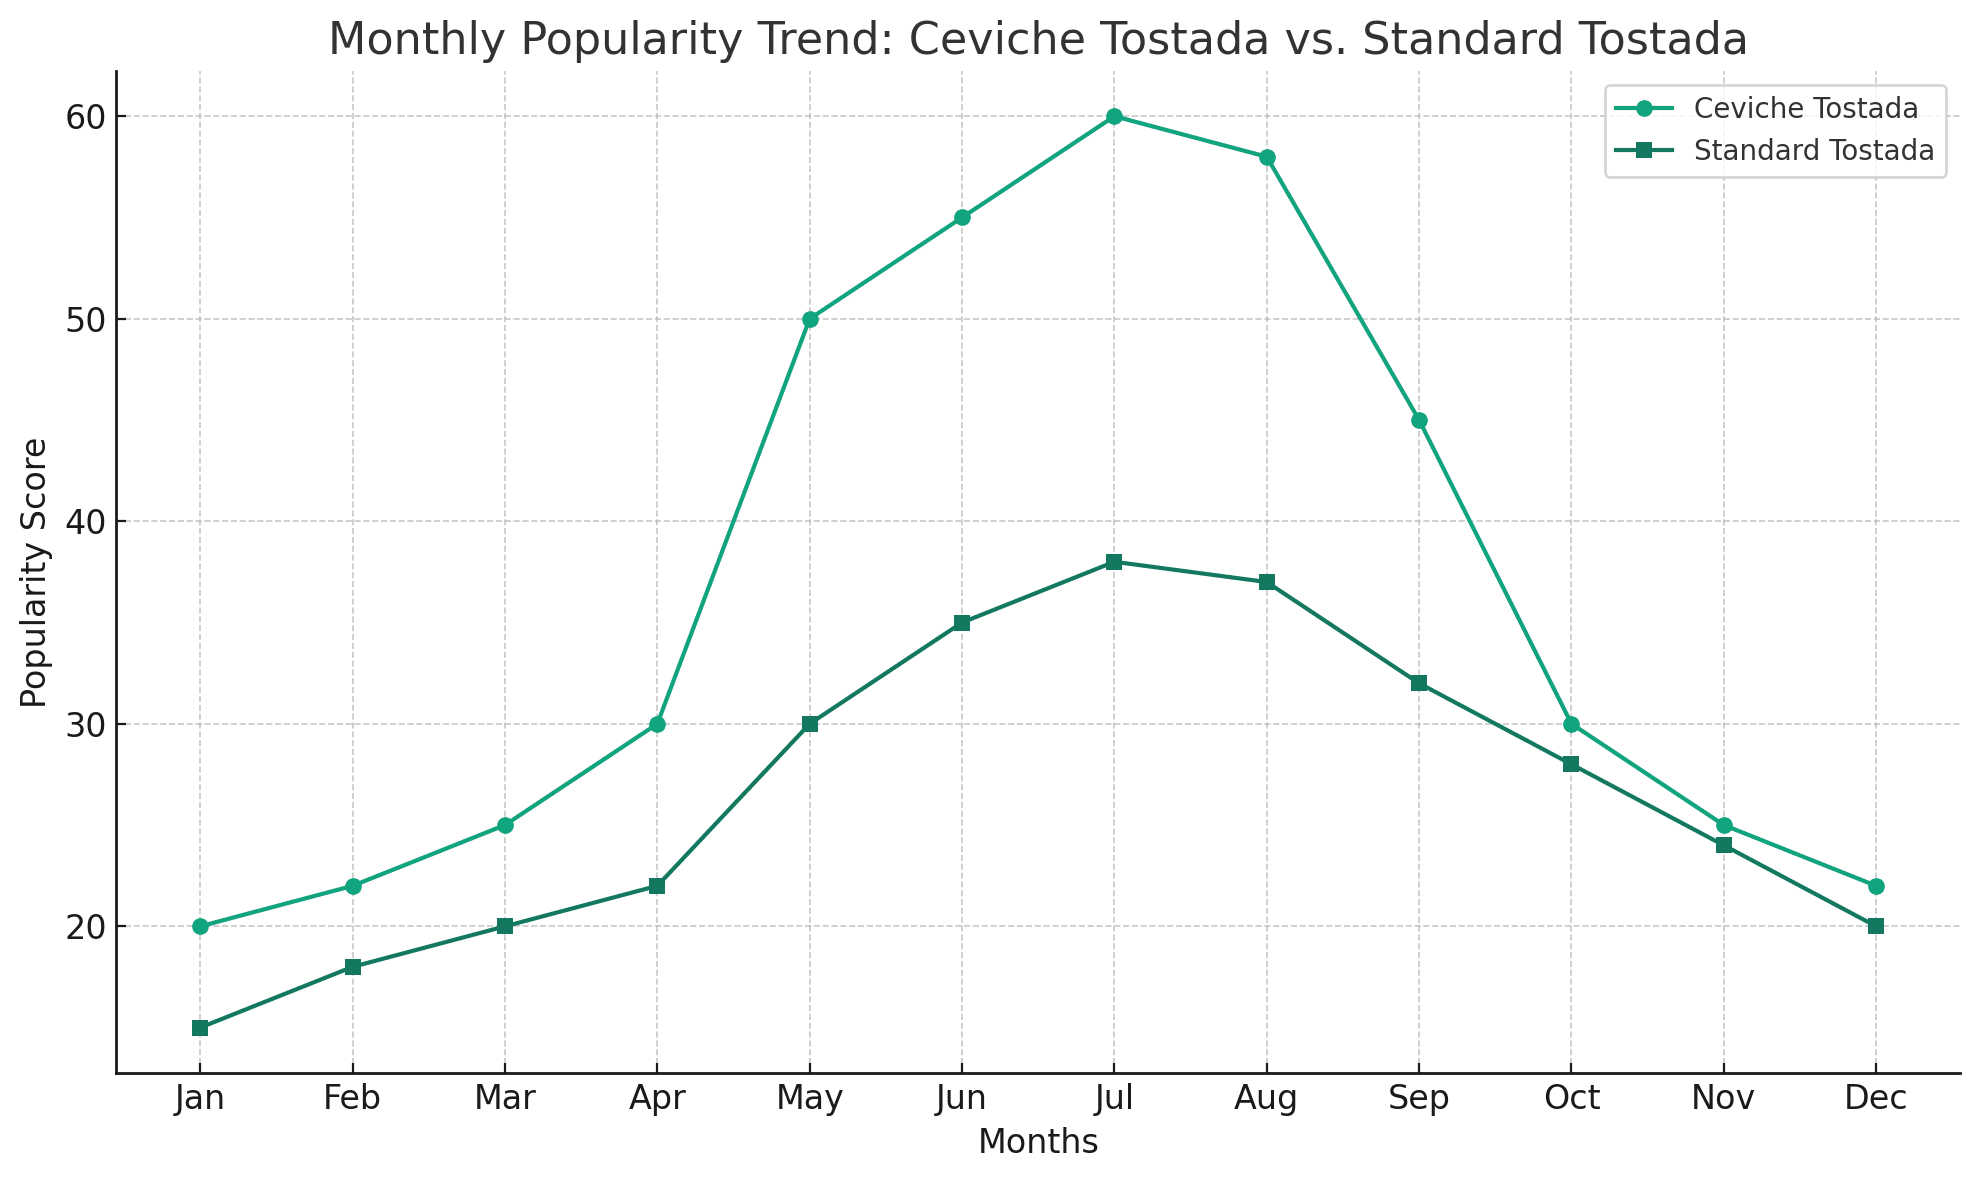 monthly popularity trend comparison between Ceviche Tostada and Standard Tostada